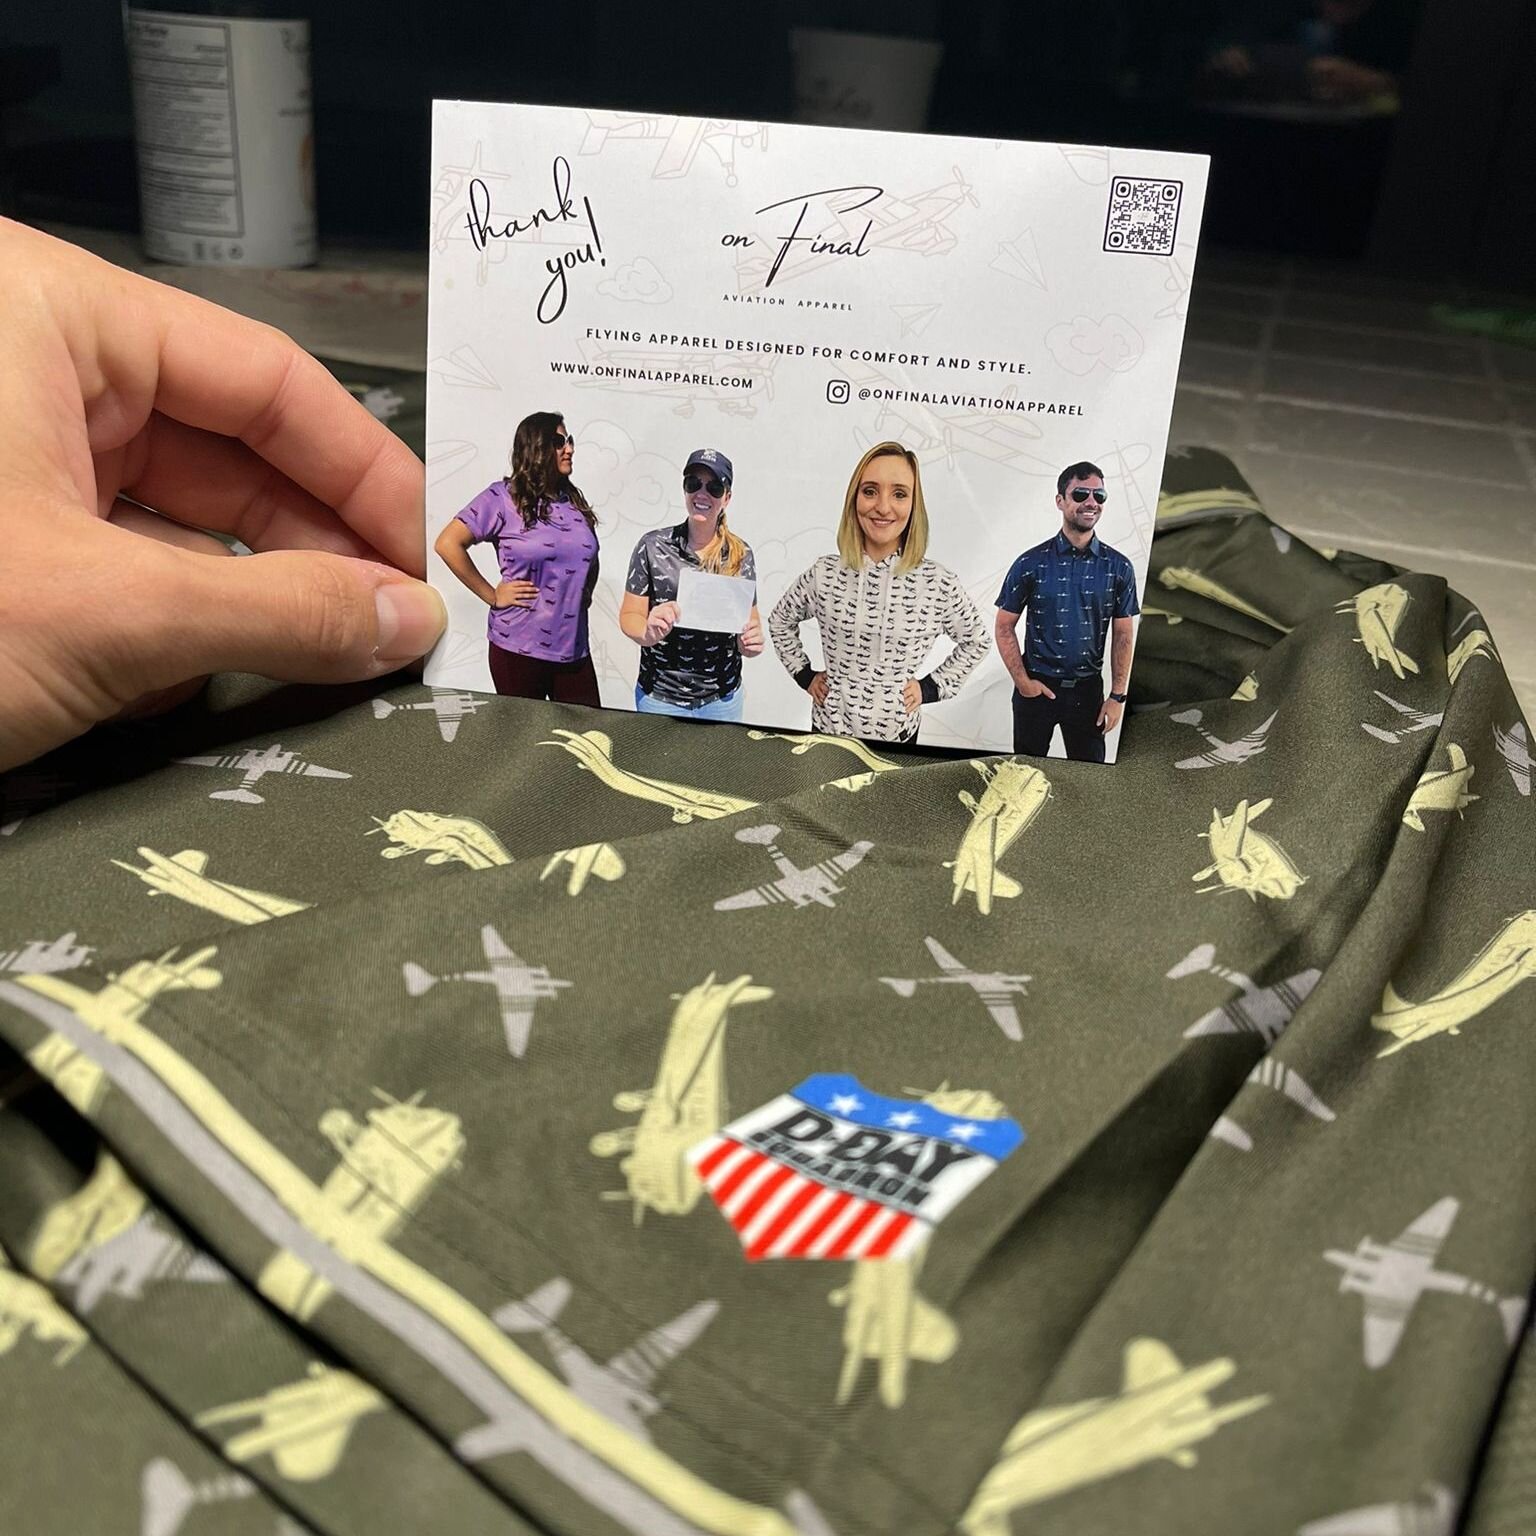 Shoutout to Bryan @bryanthetallkid  for his recent DC3 Men's Polo purchase, which supports the @ddaysquadron . It's always great to see customers like Bryan showing off their love for aviation with our designs!

Thank you for choosing On Final Appare